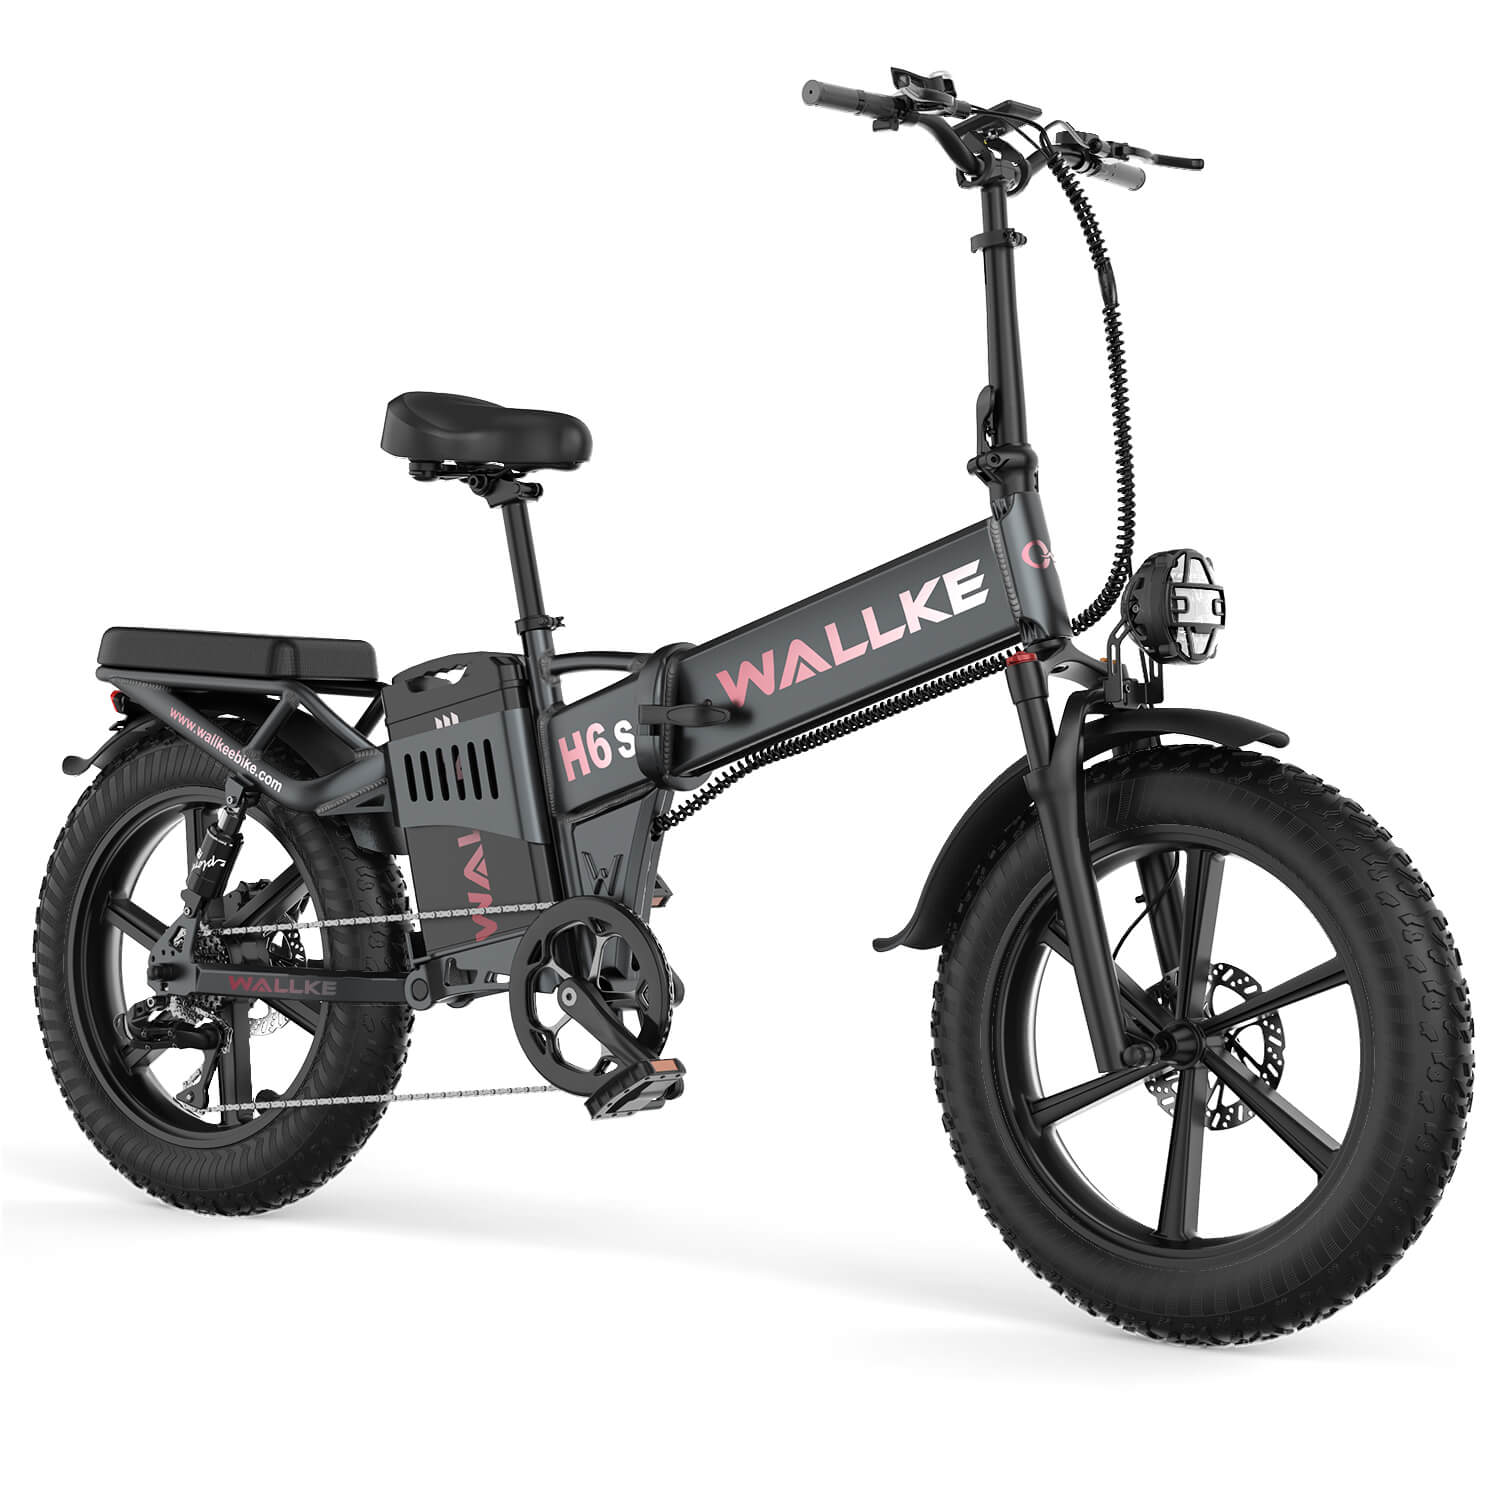 Wallke E-bike H6 MAX has a cruising range of 120-200 miles, a long-distance electric bicycle, bringing more convenience to your travel